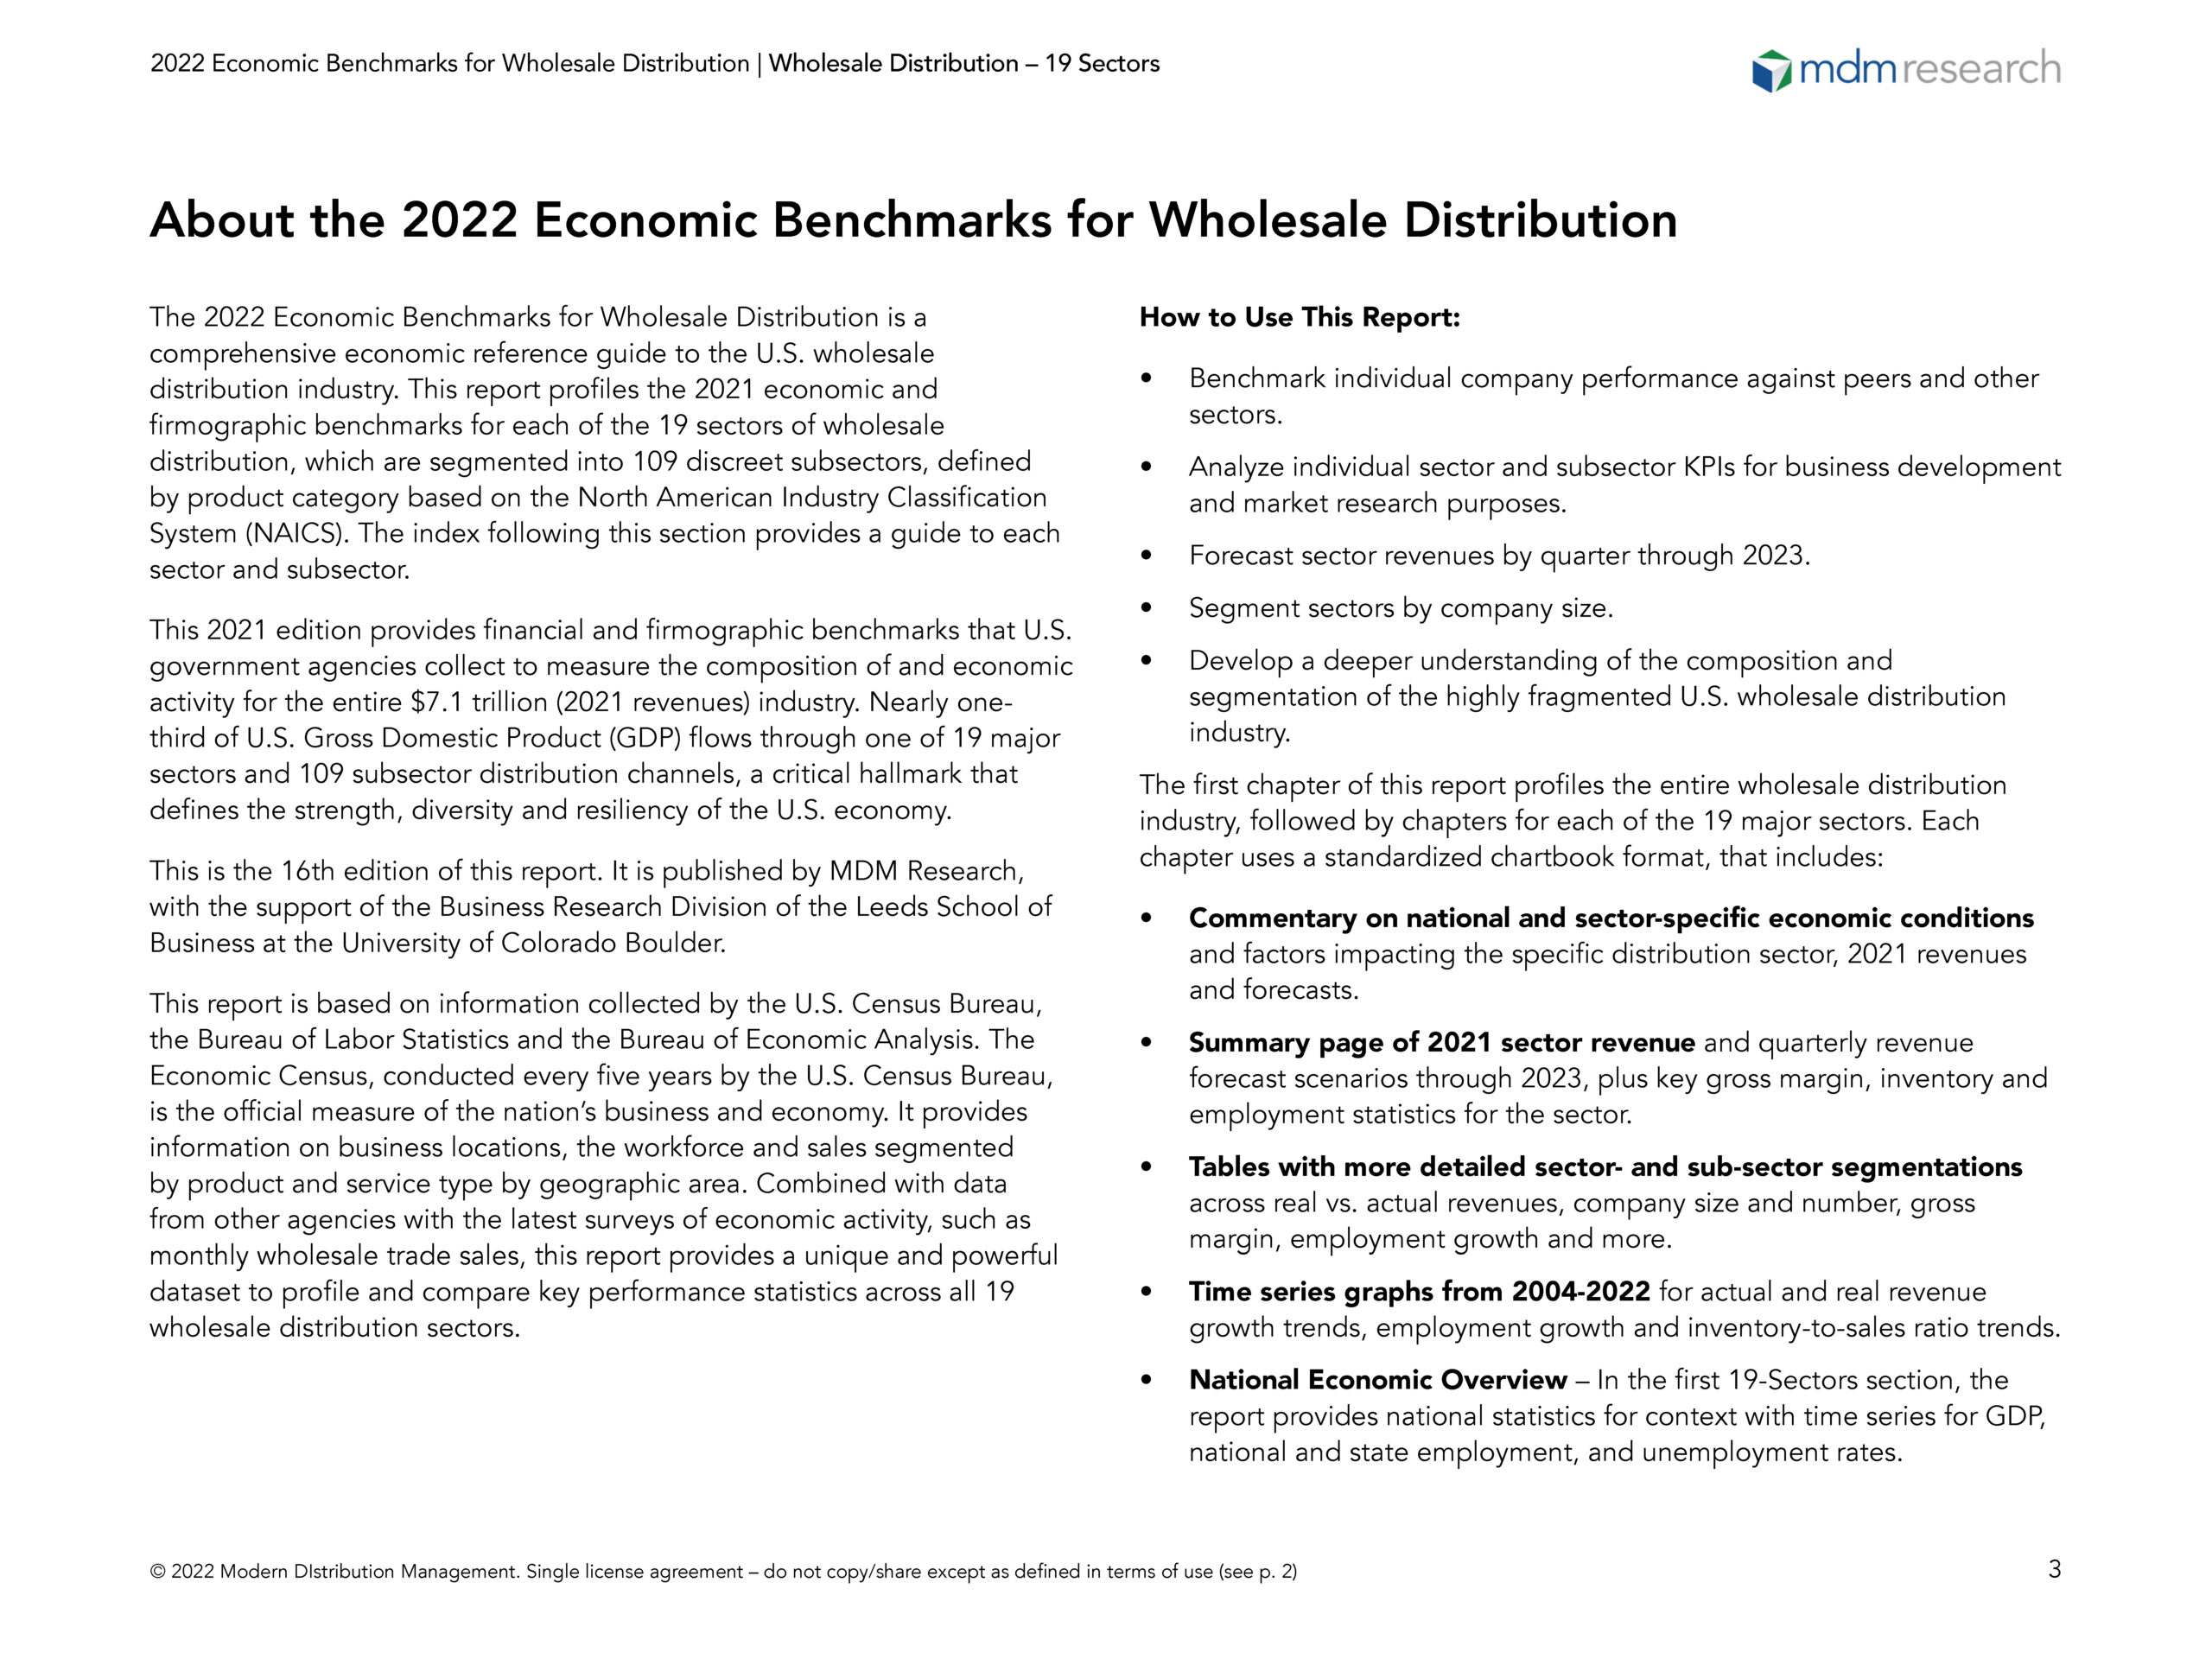 What does wholesale look like in 2022?